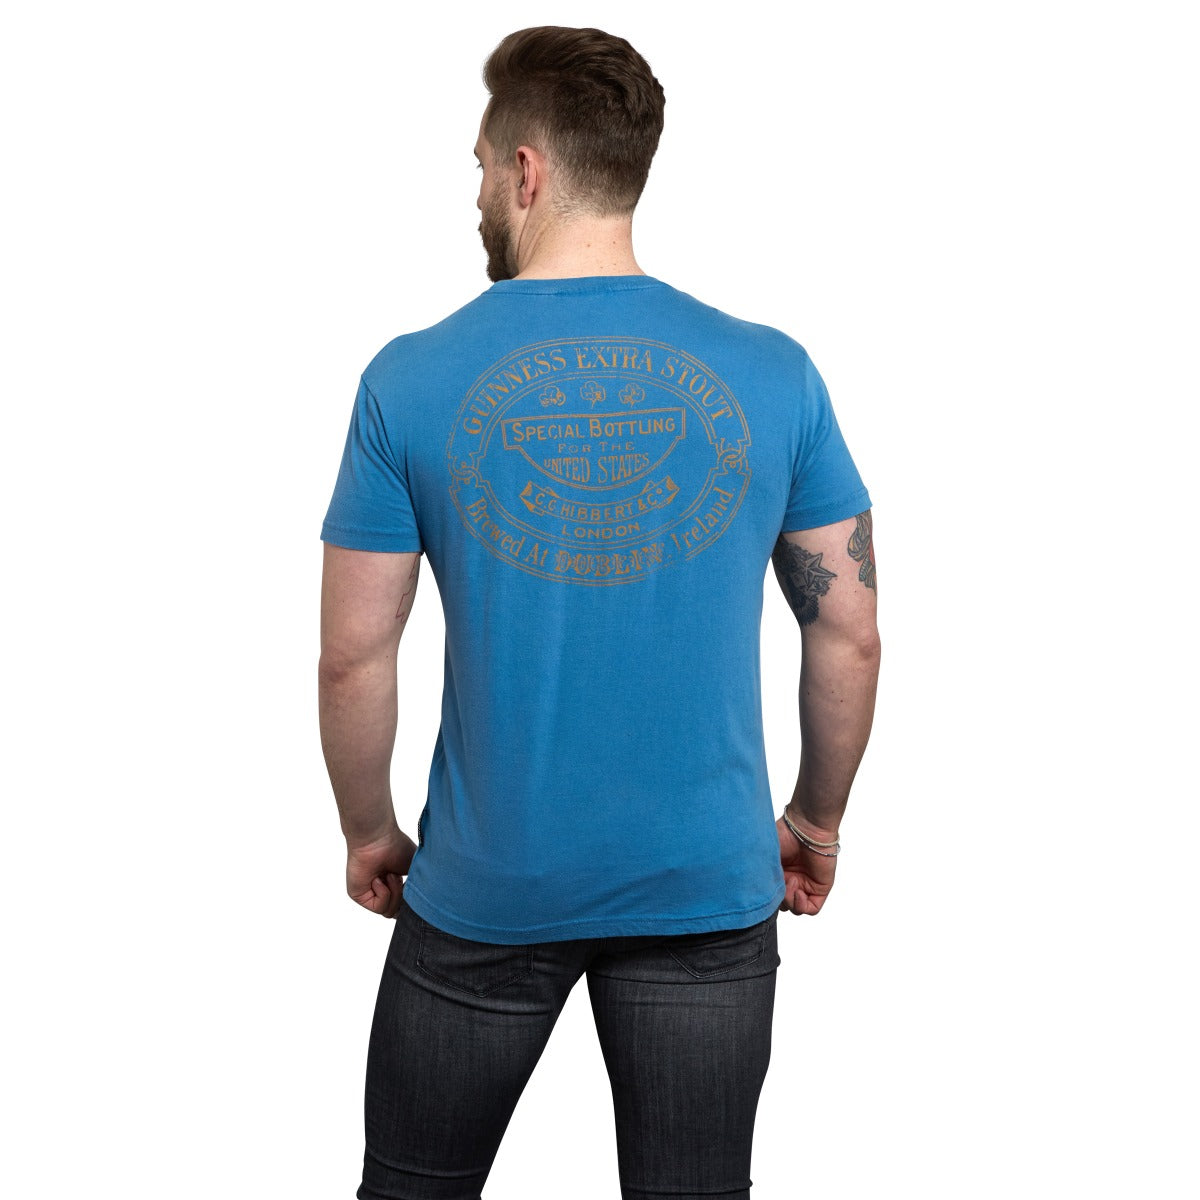 The back view of a man wearing a Guinness Trademark Label T-Shirt Blue with the Guinness brand.